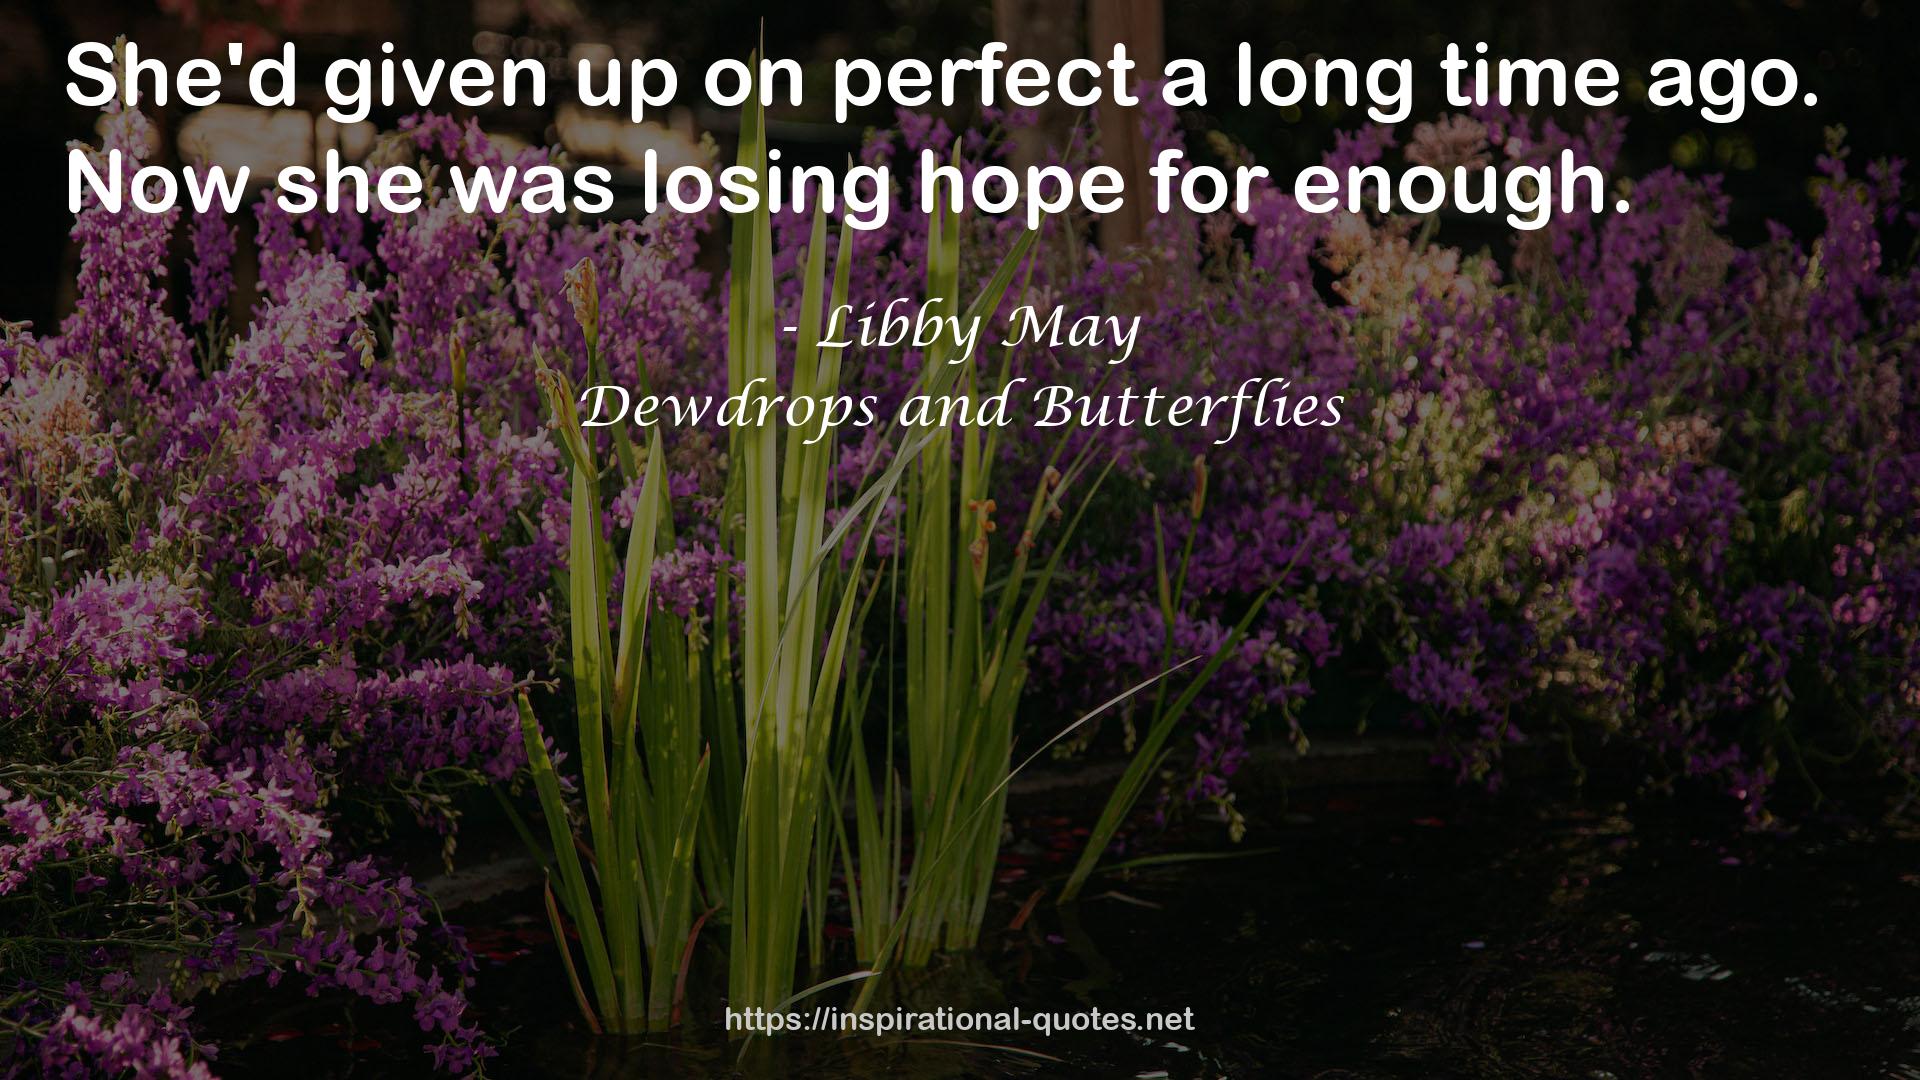 Dewdrops and Butterflies QUOTES